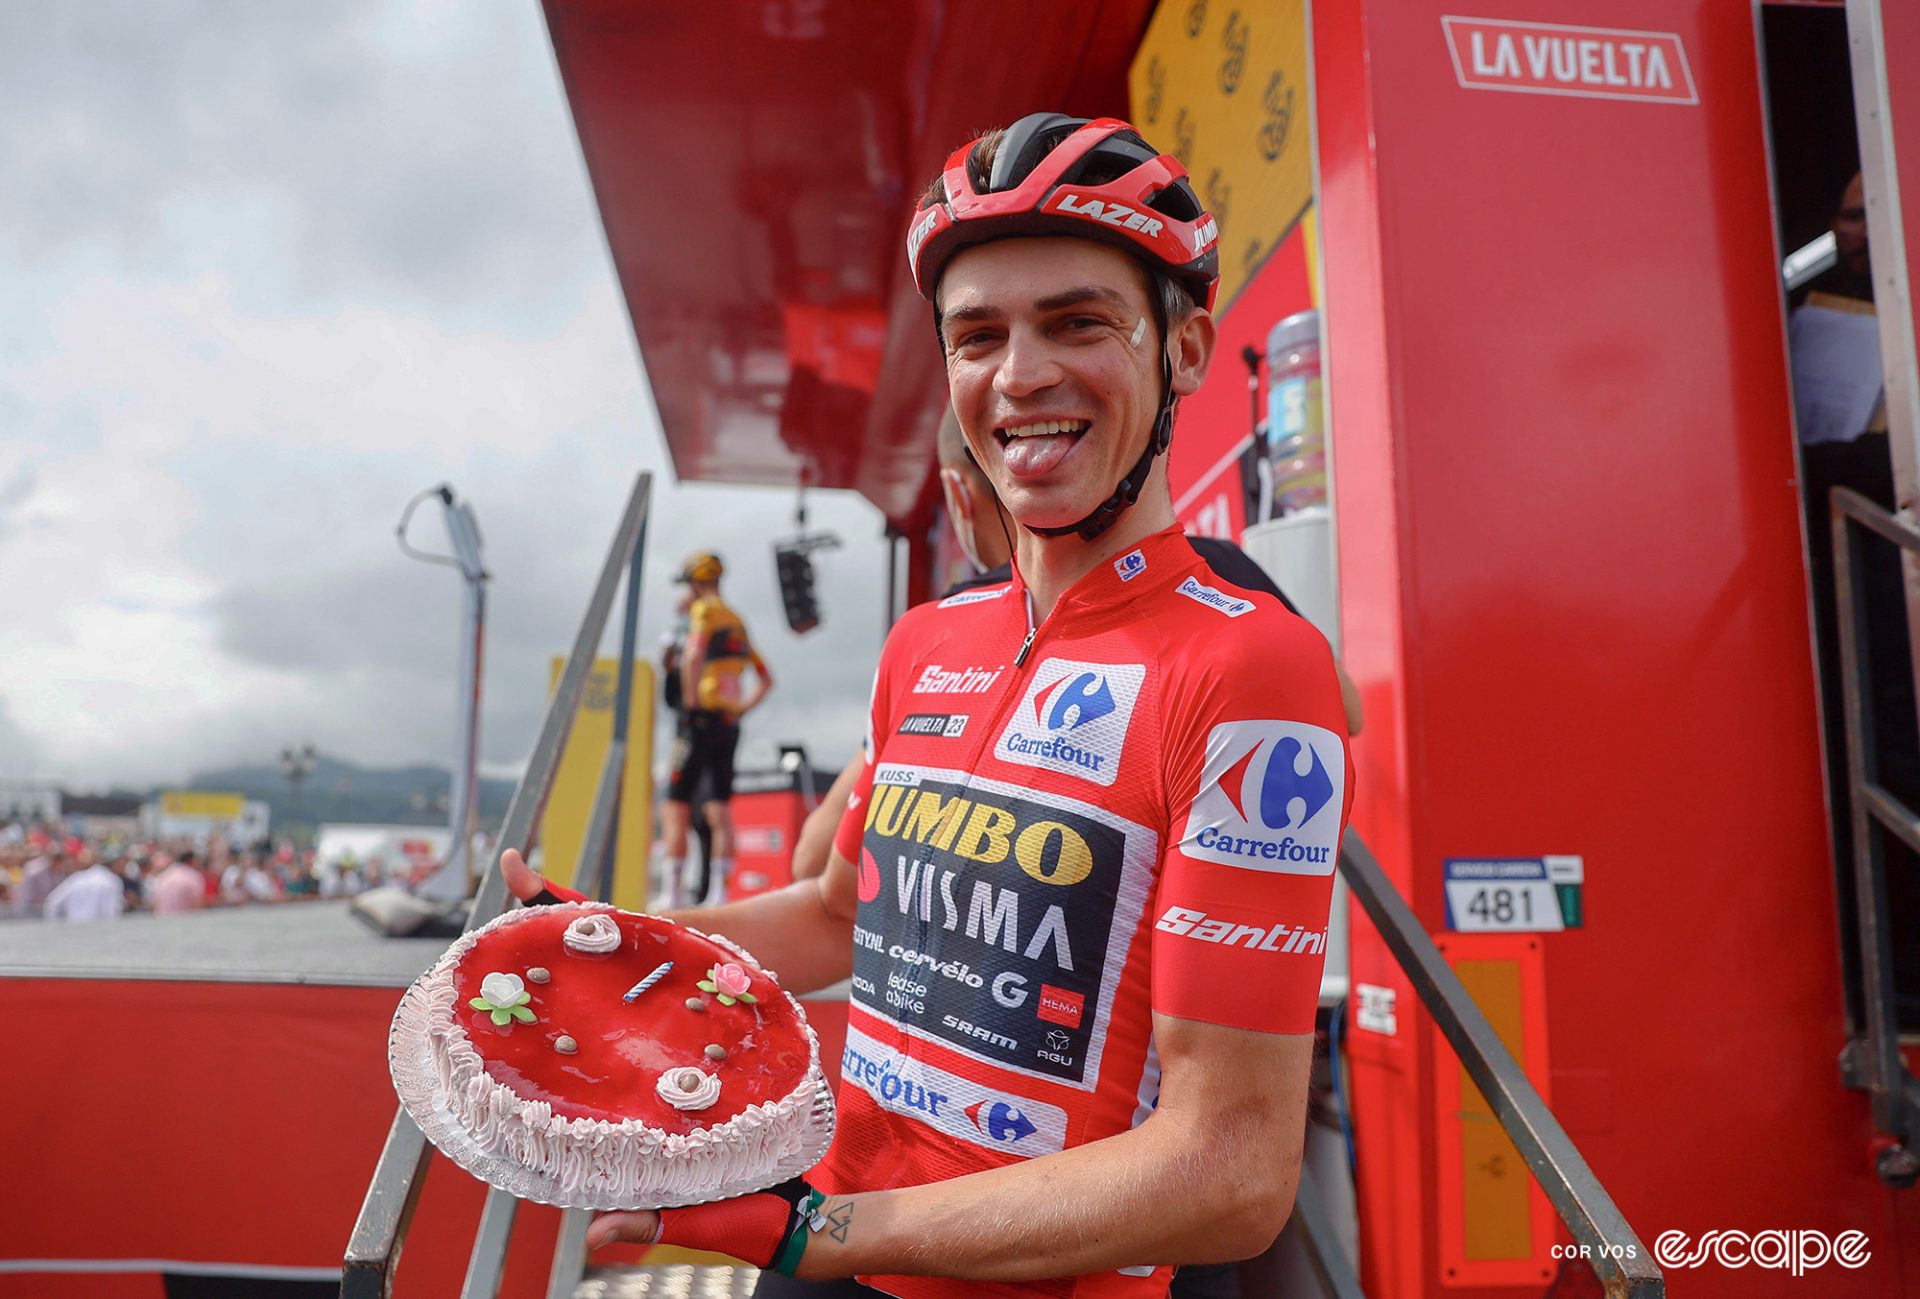 Sepp Kuss holds up a birthday cake. The frosting is red, with some white and pink flowers and pink-white piping on the outside. He has his mouth open and tongue out, as if he's exhausted by the cake's repeated, un-teammate like attacks.